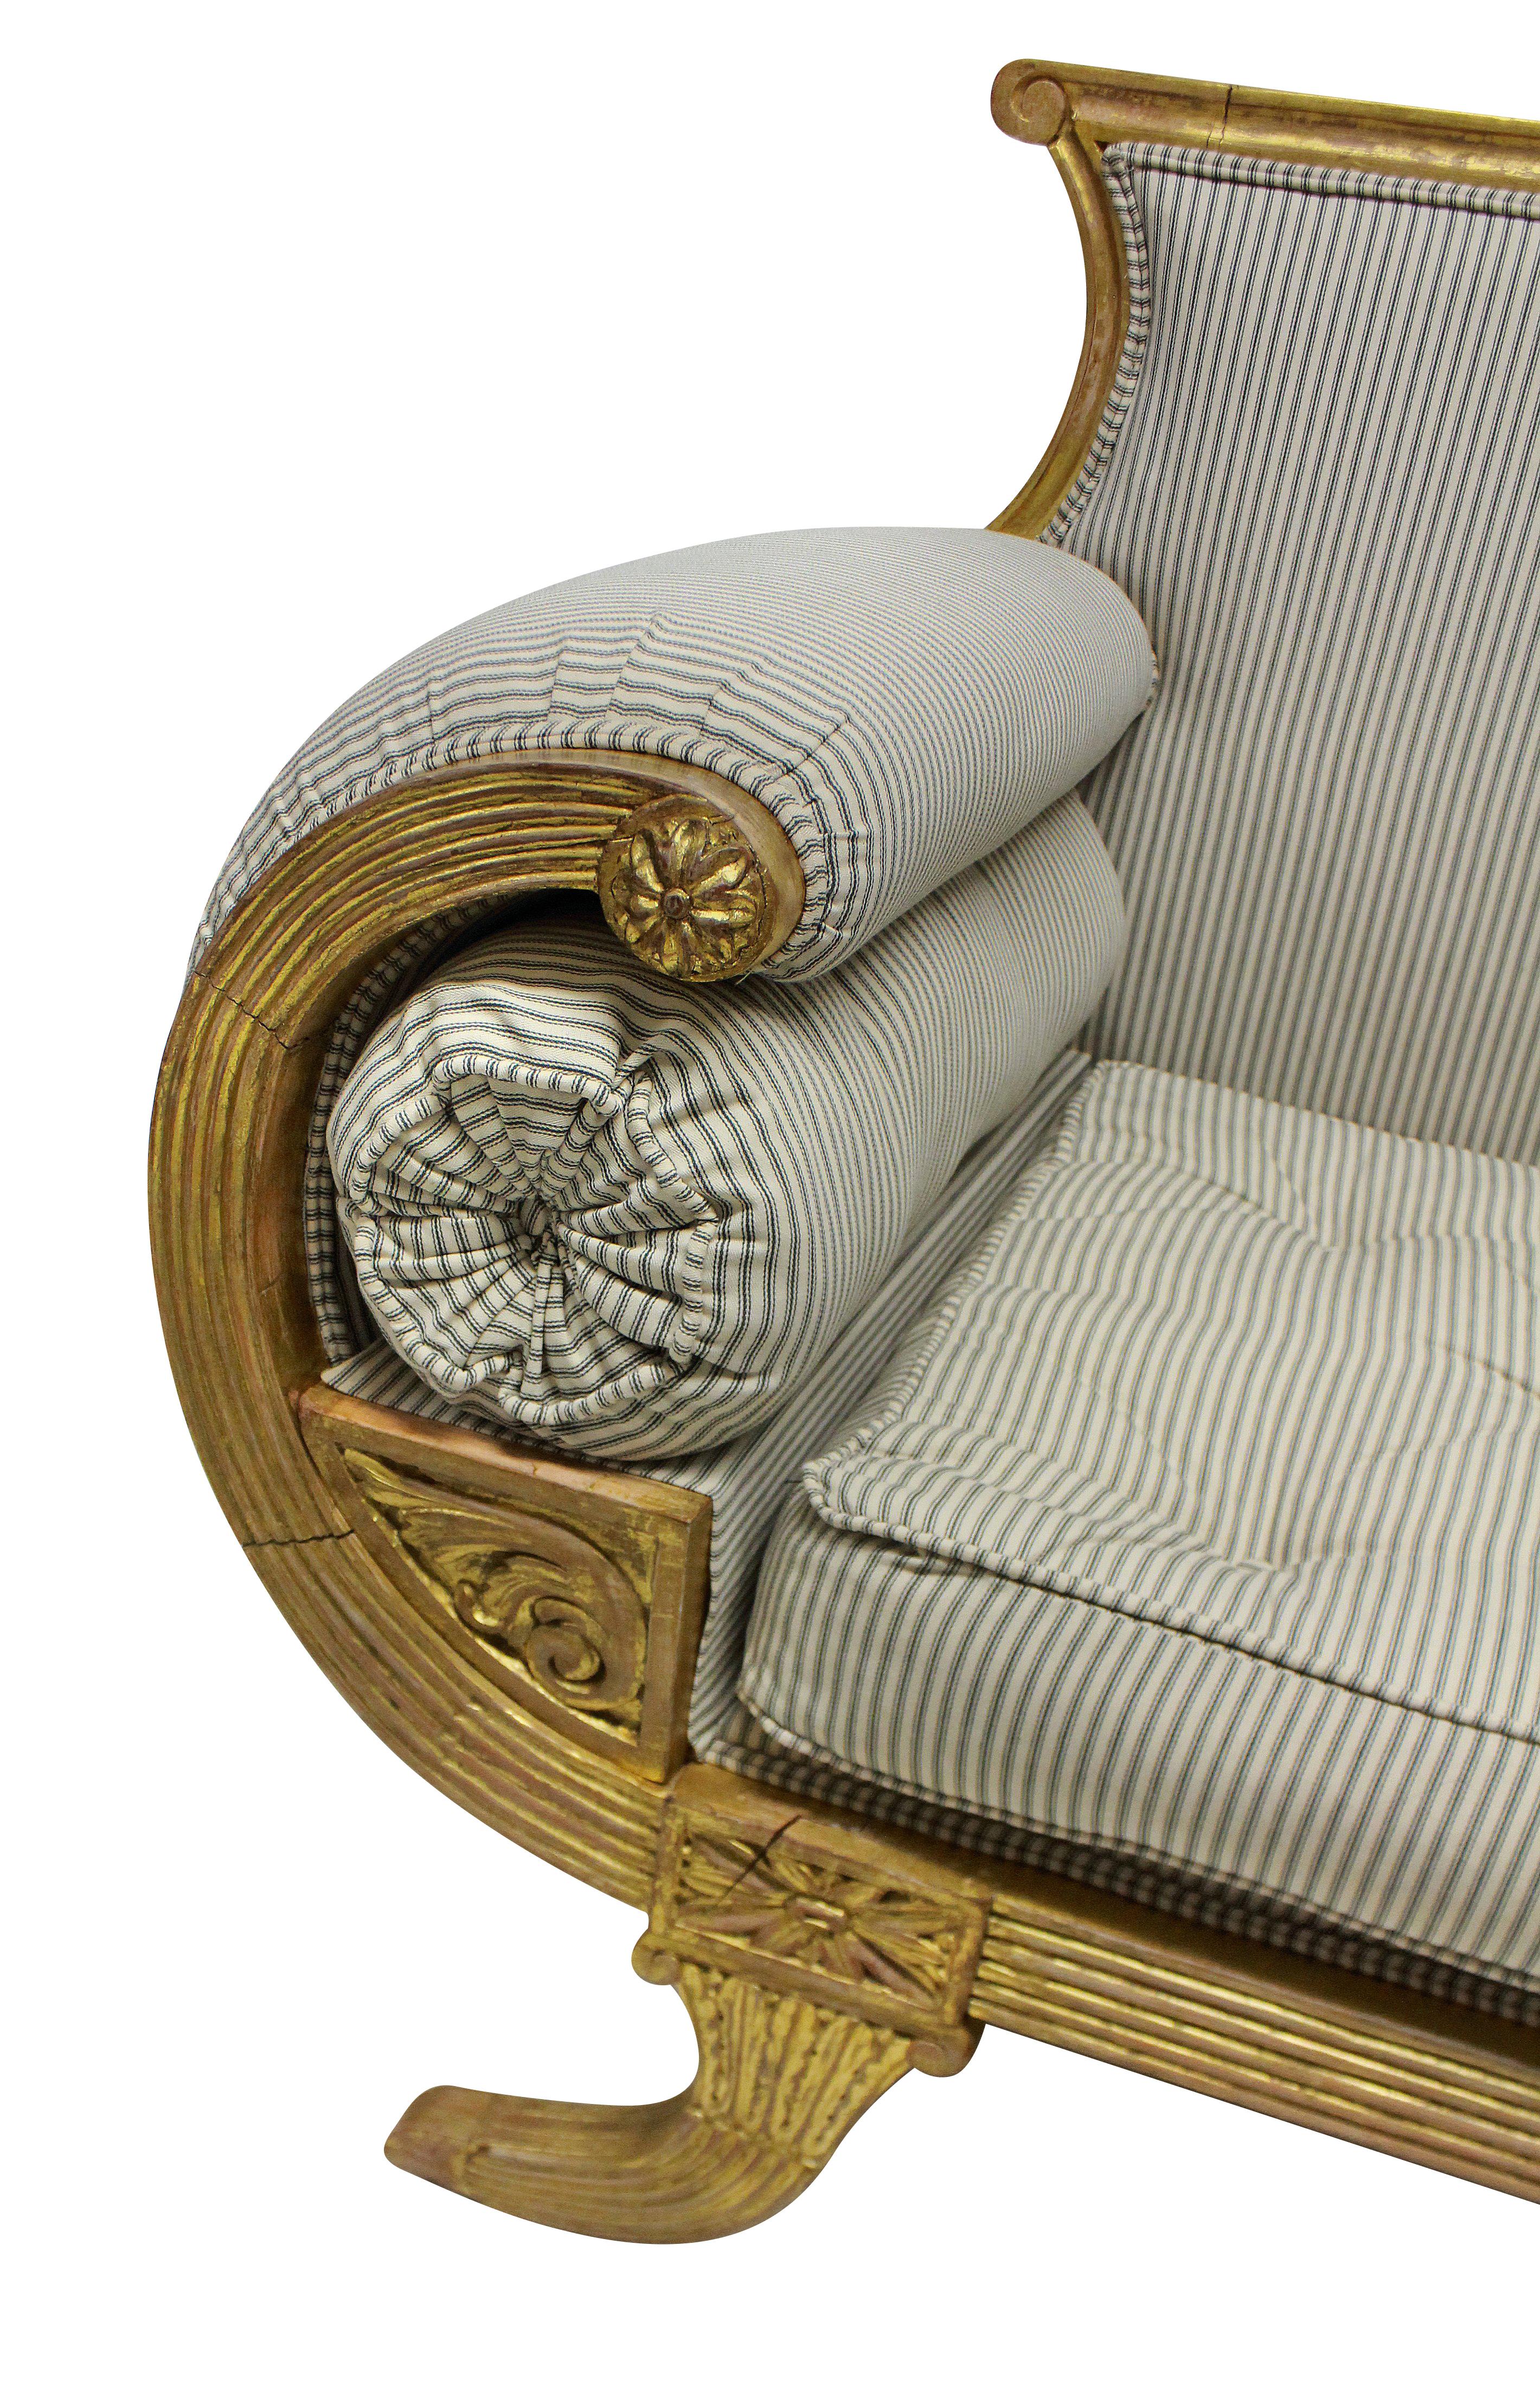 A fine English Regency revival giltwood settee in the Egyptian taste. Water gilded throughout and upholstered in ticking.